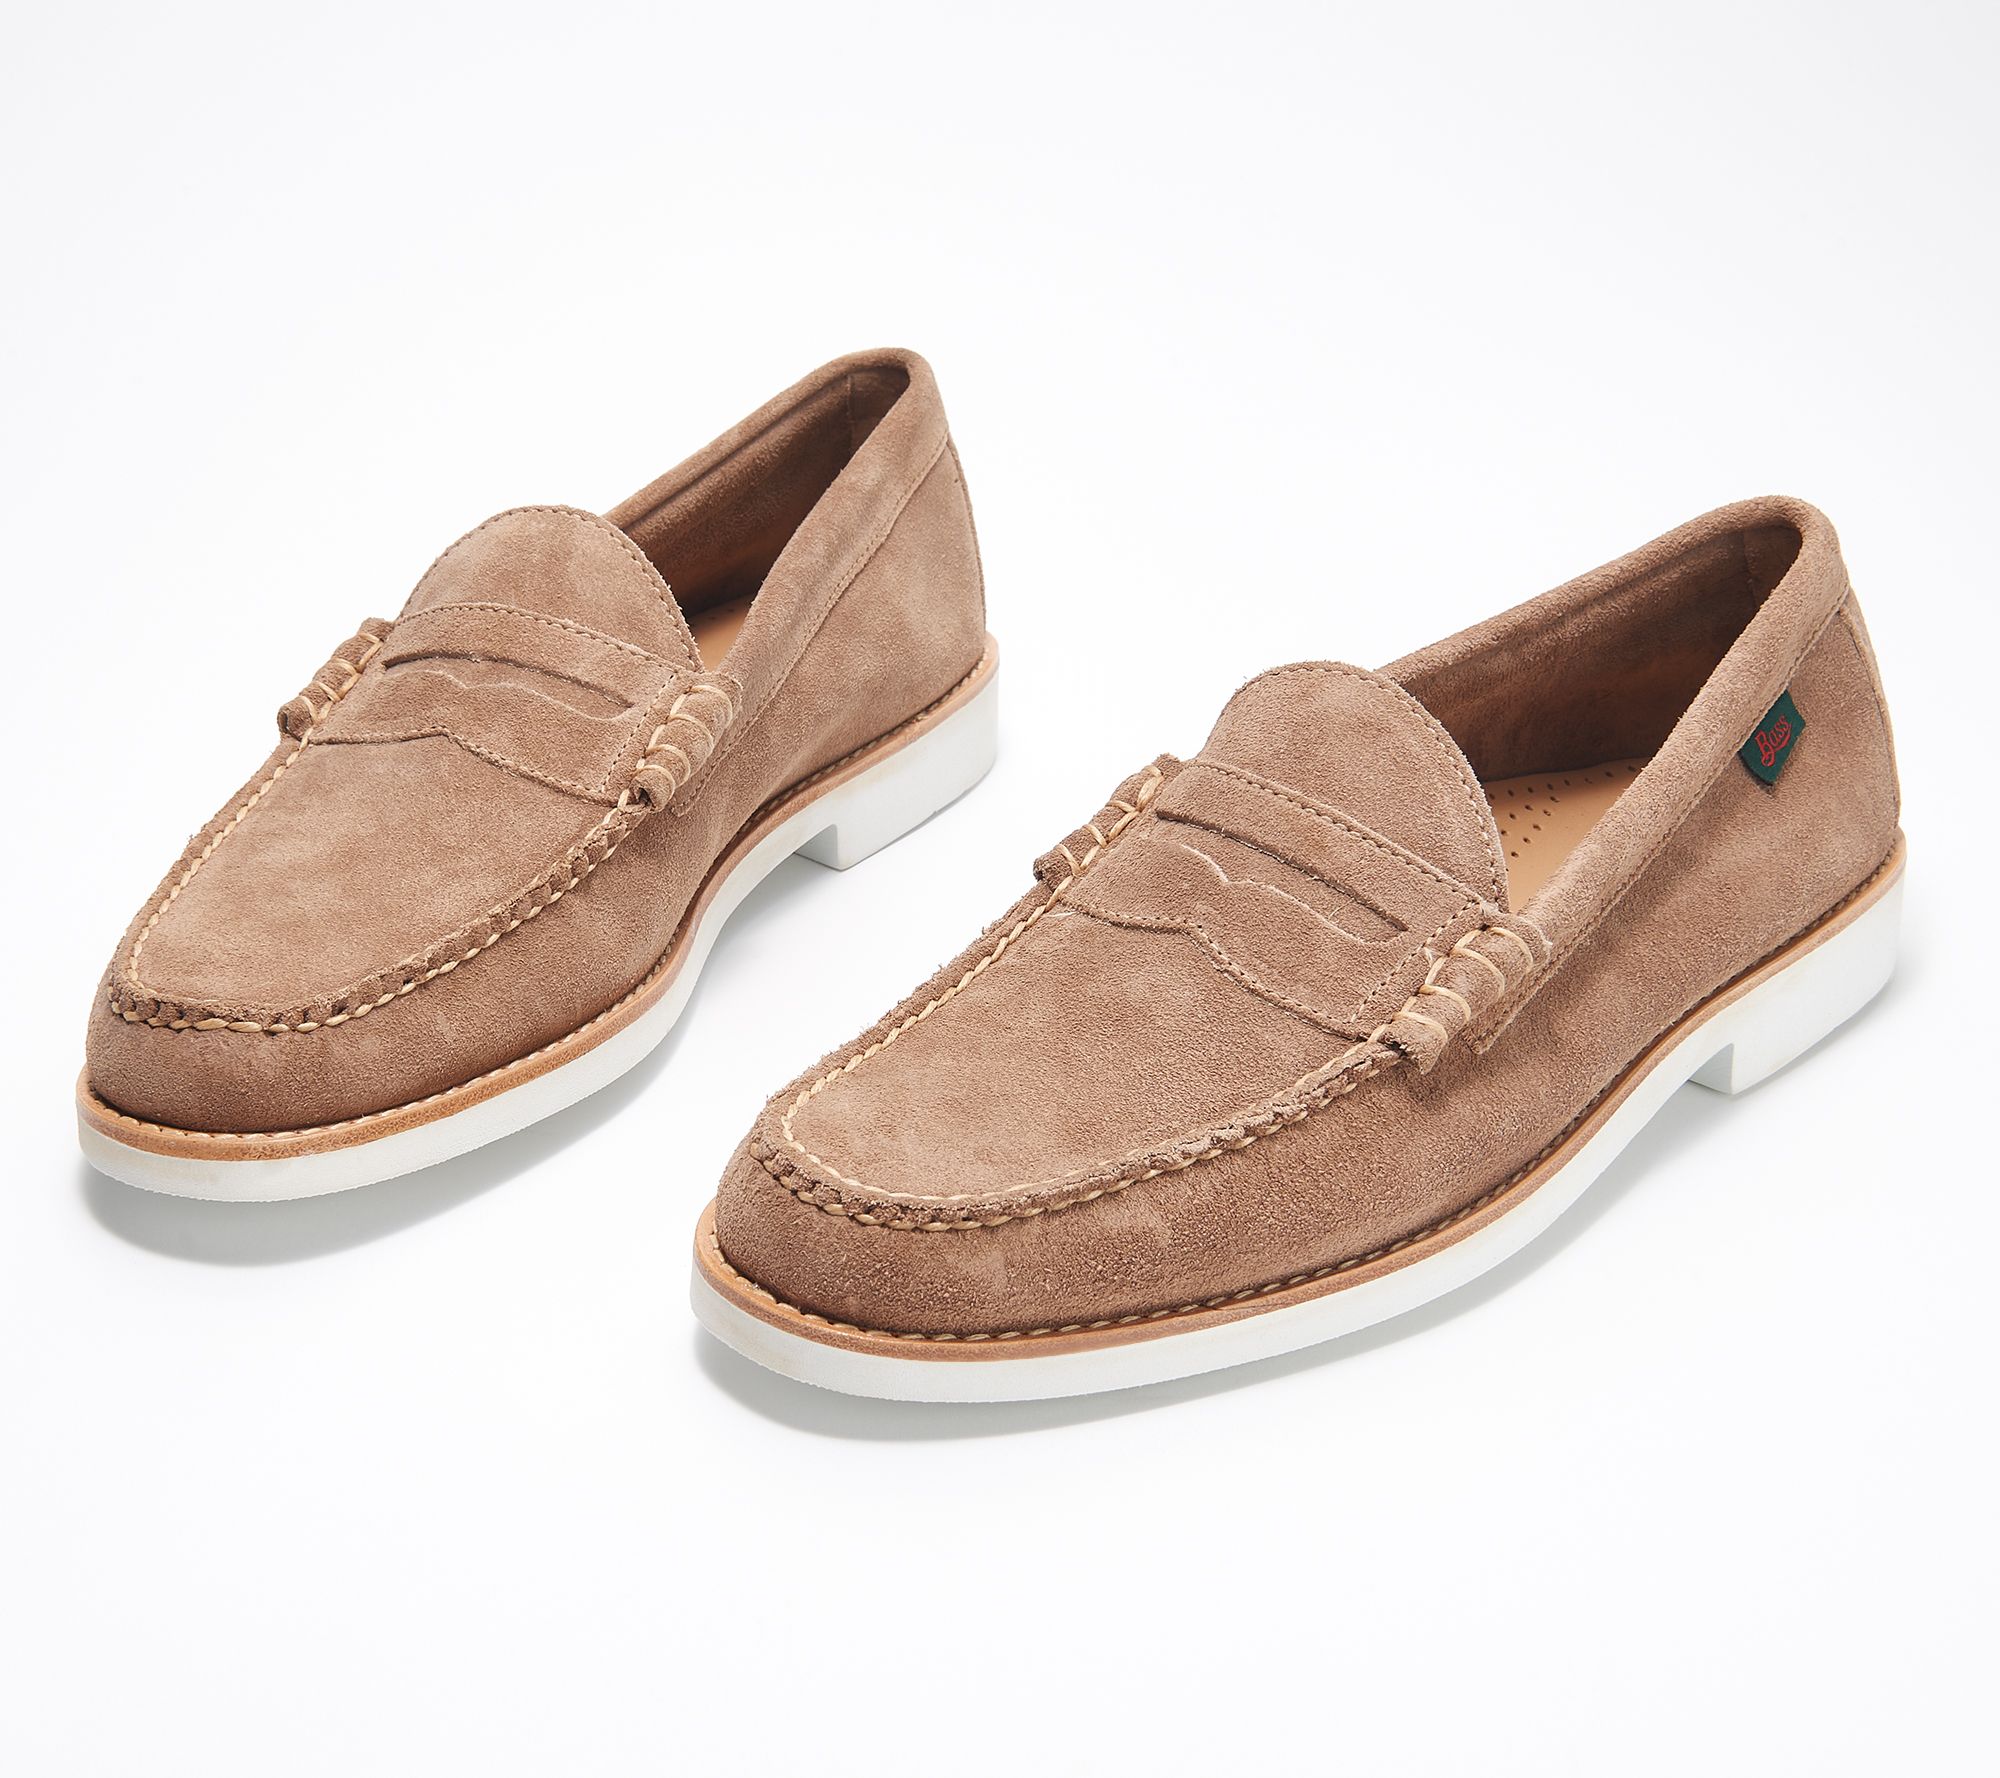 G.H. Bass Originals Weejuns Penny Loafers - Larson Suede - QVC.com